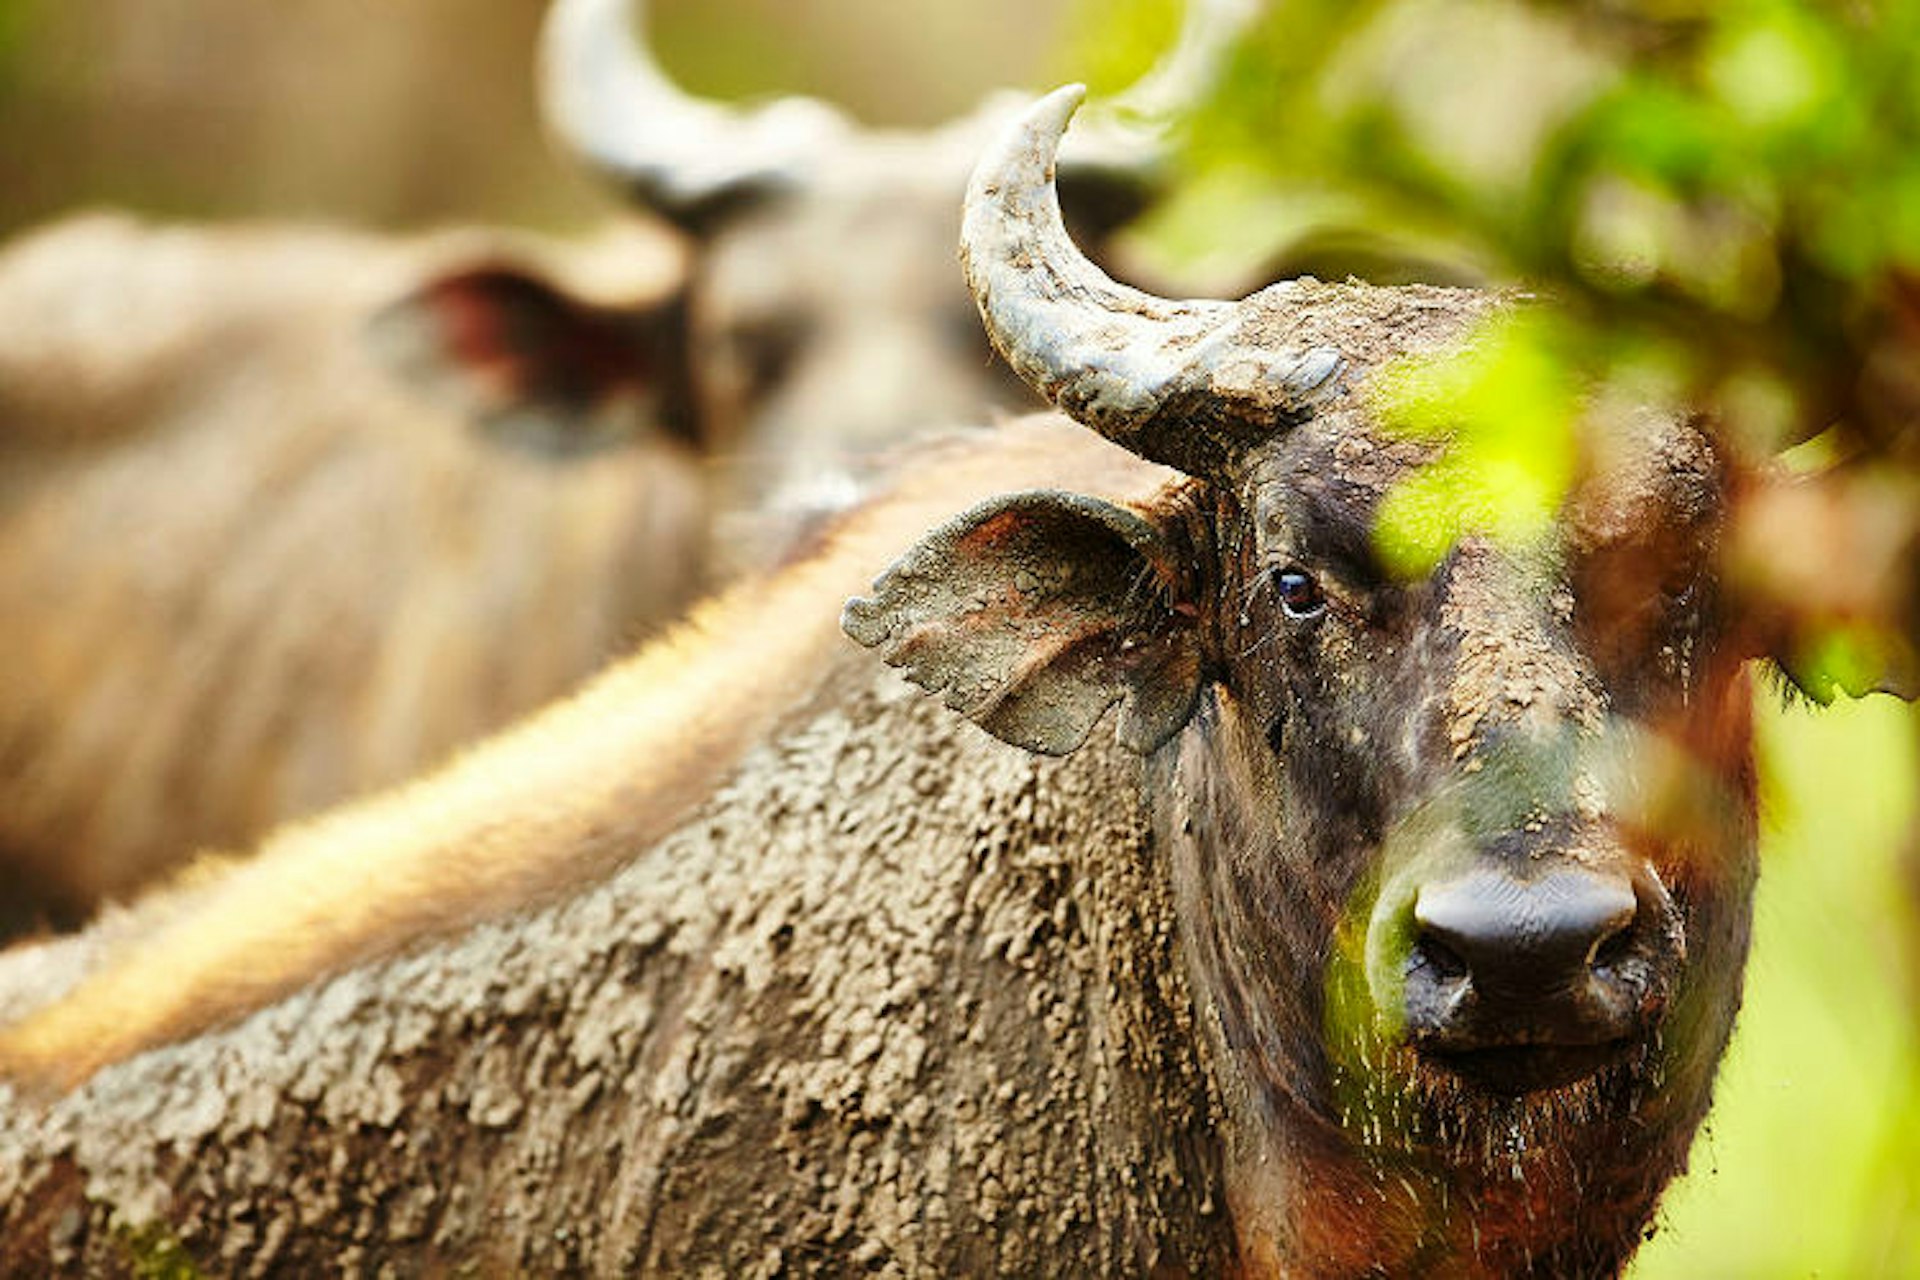 Caught in a stare, forest buffalo in Parc National D'Odzala, Republic of Congo. Image by Mark Read / Lonely Planet